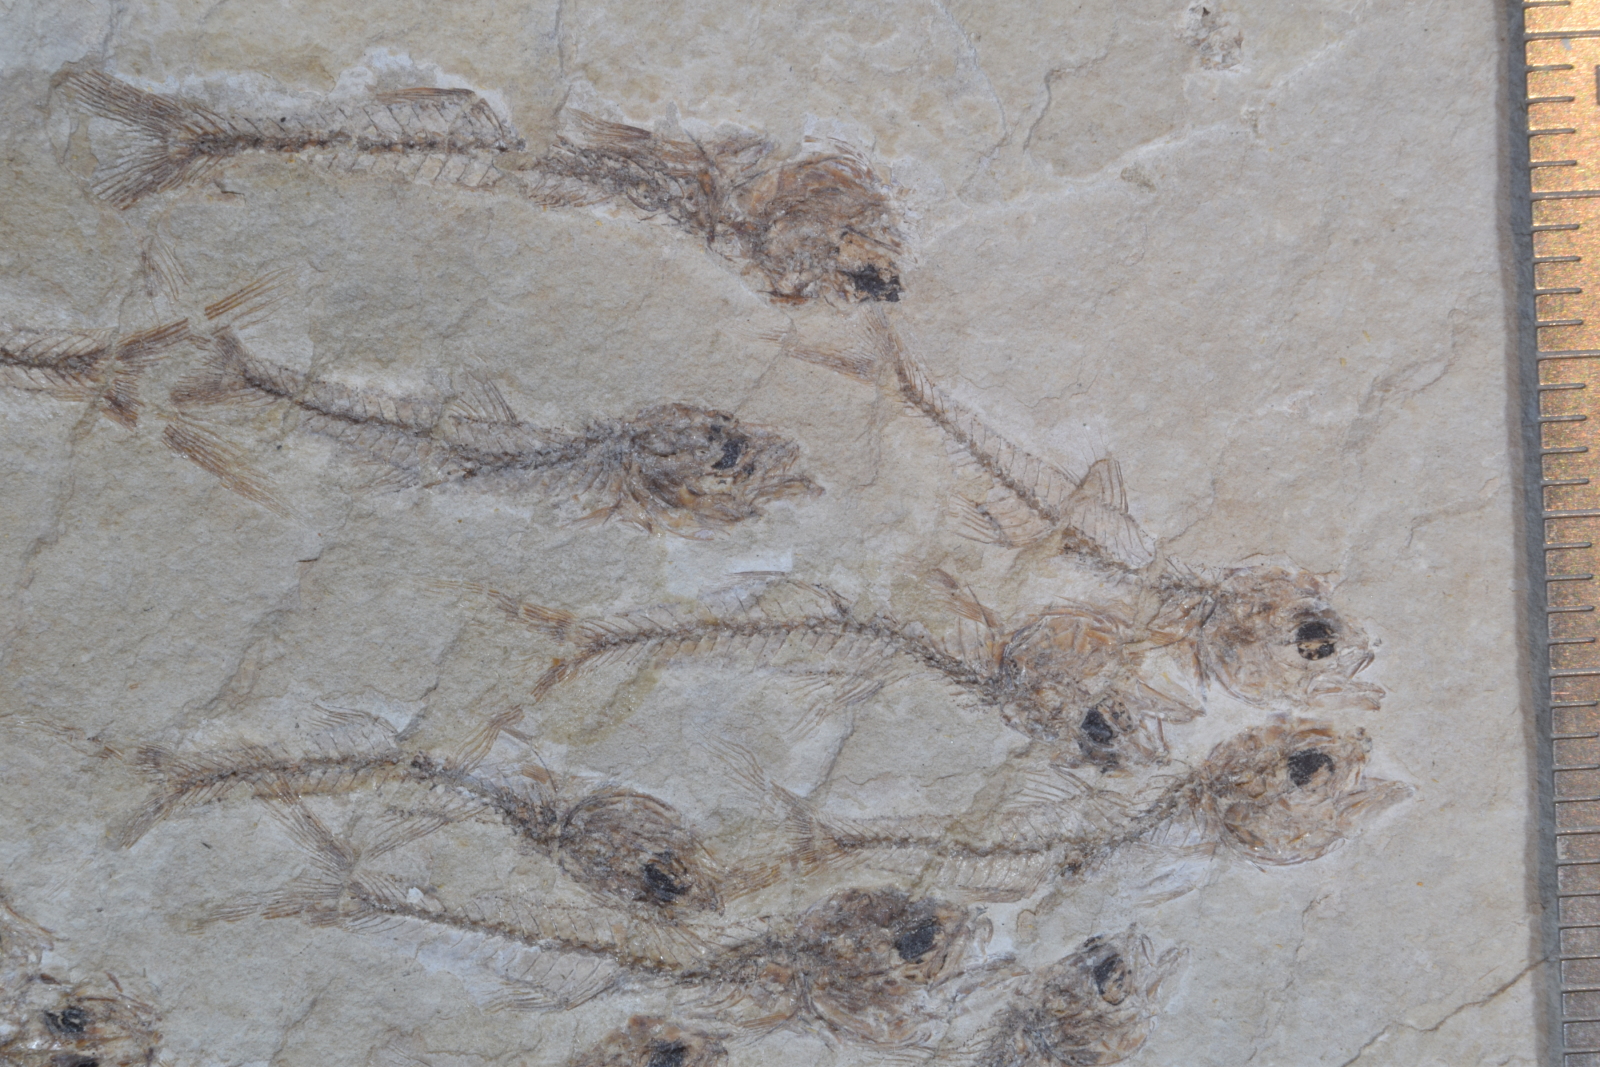 Fossilized fish species published in Proceedings of Royal Society B